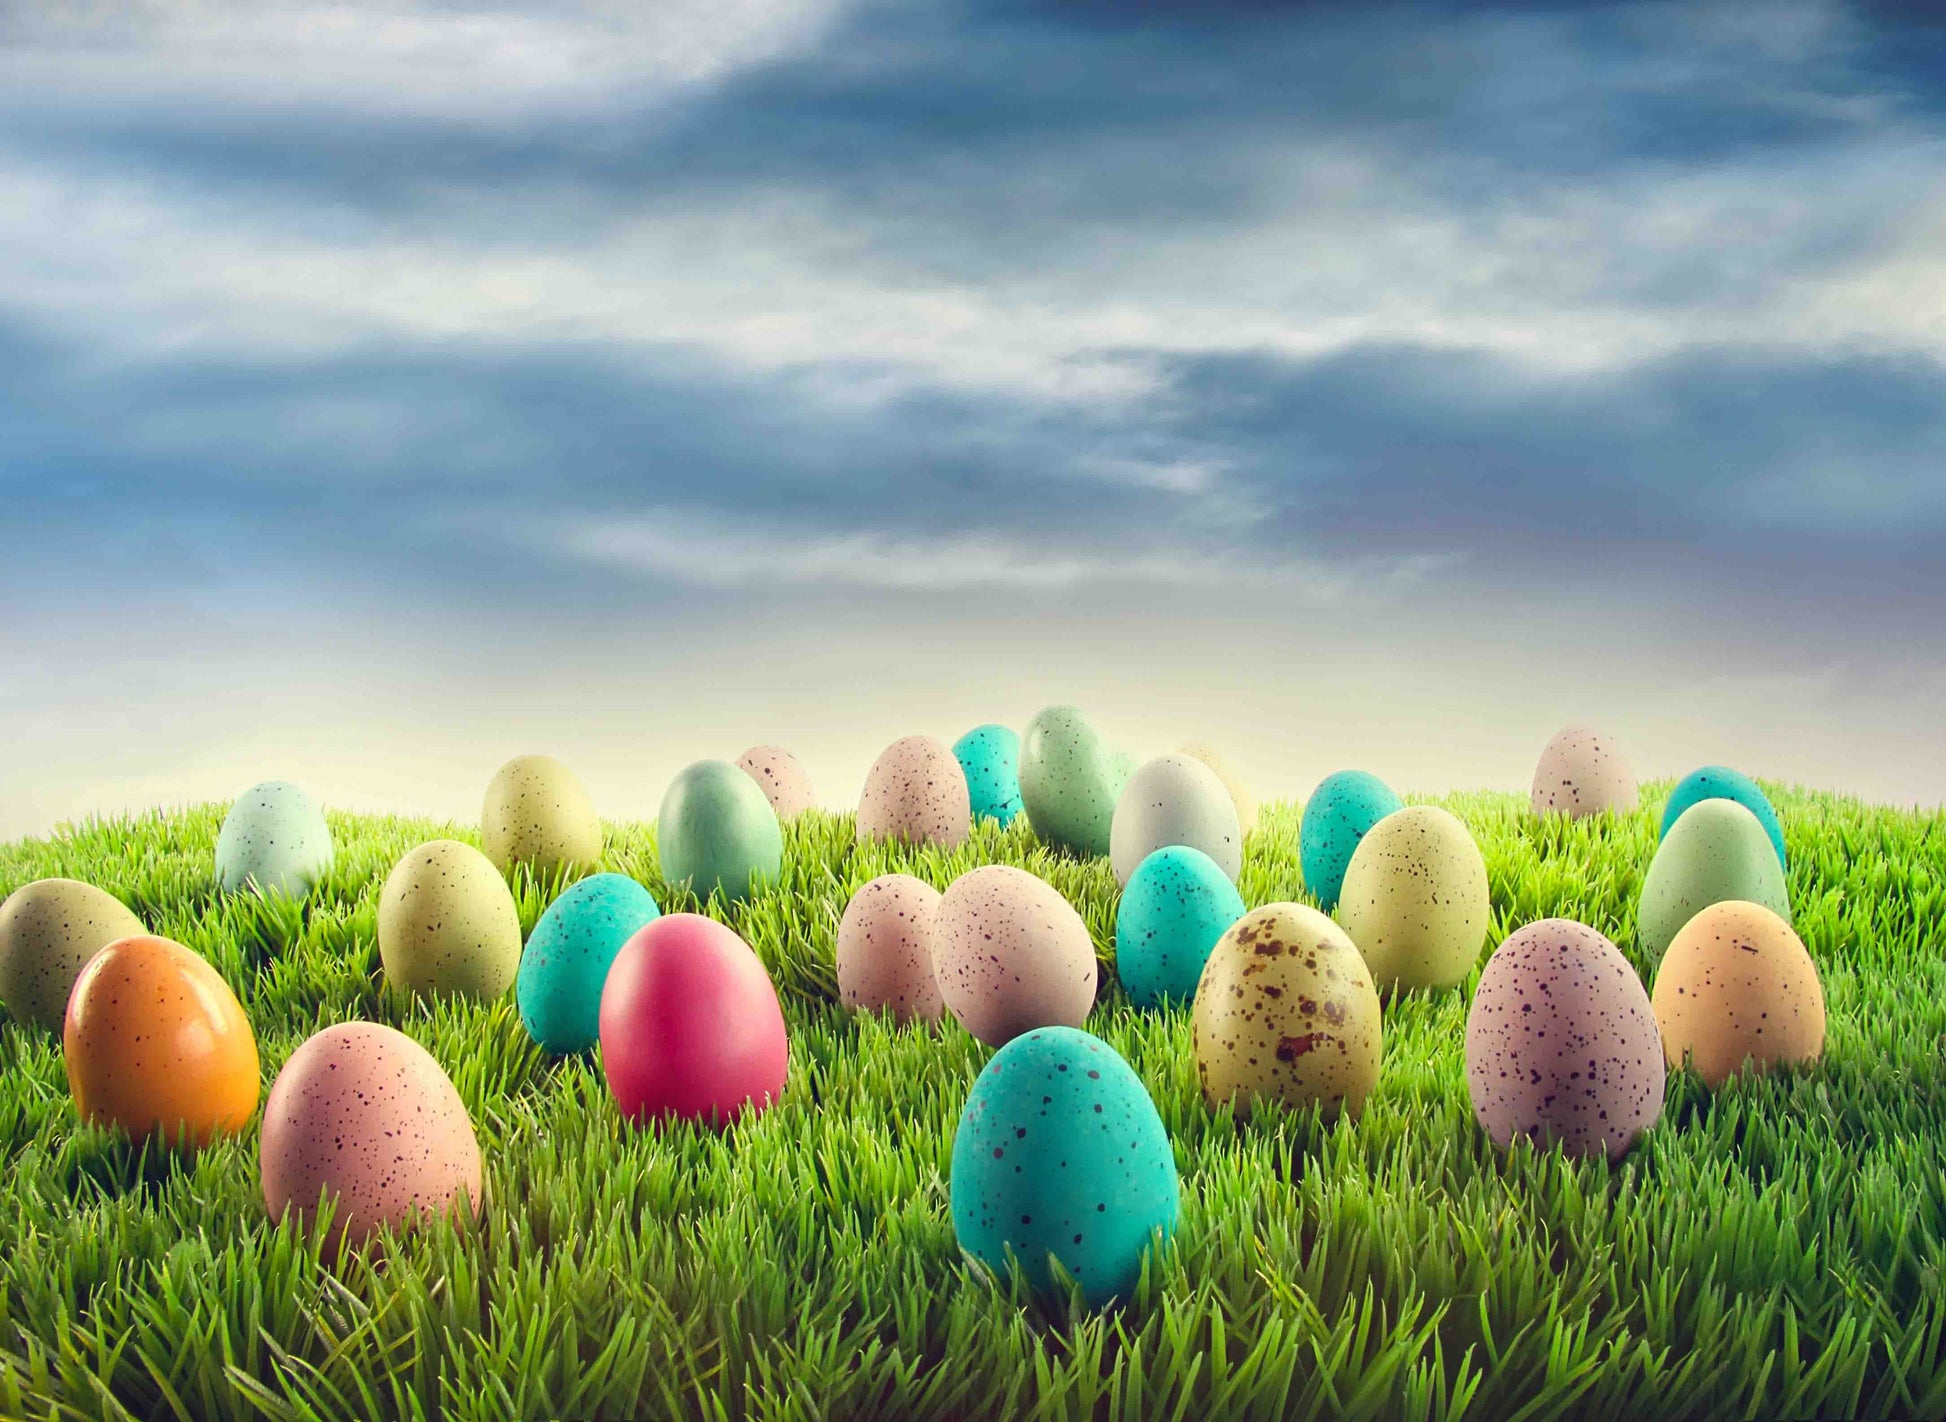 Colorful Easter Eggs On Green Grass Photography Backdrop Shopbackdrop